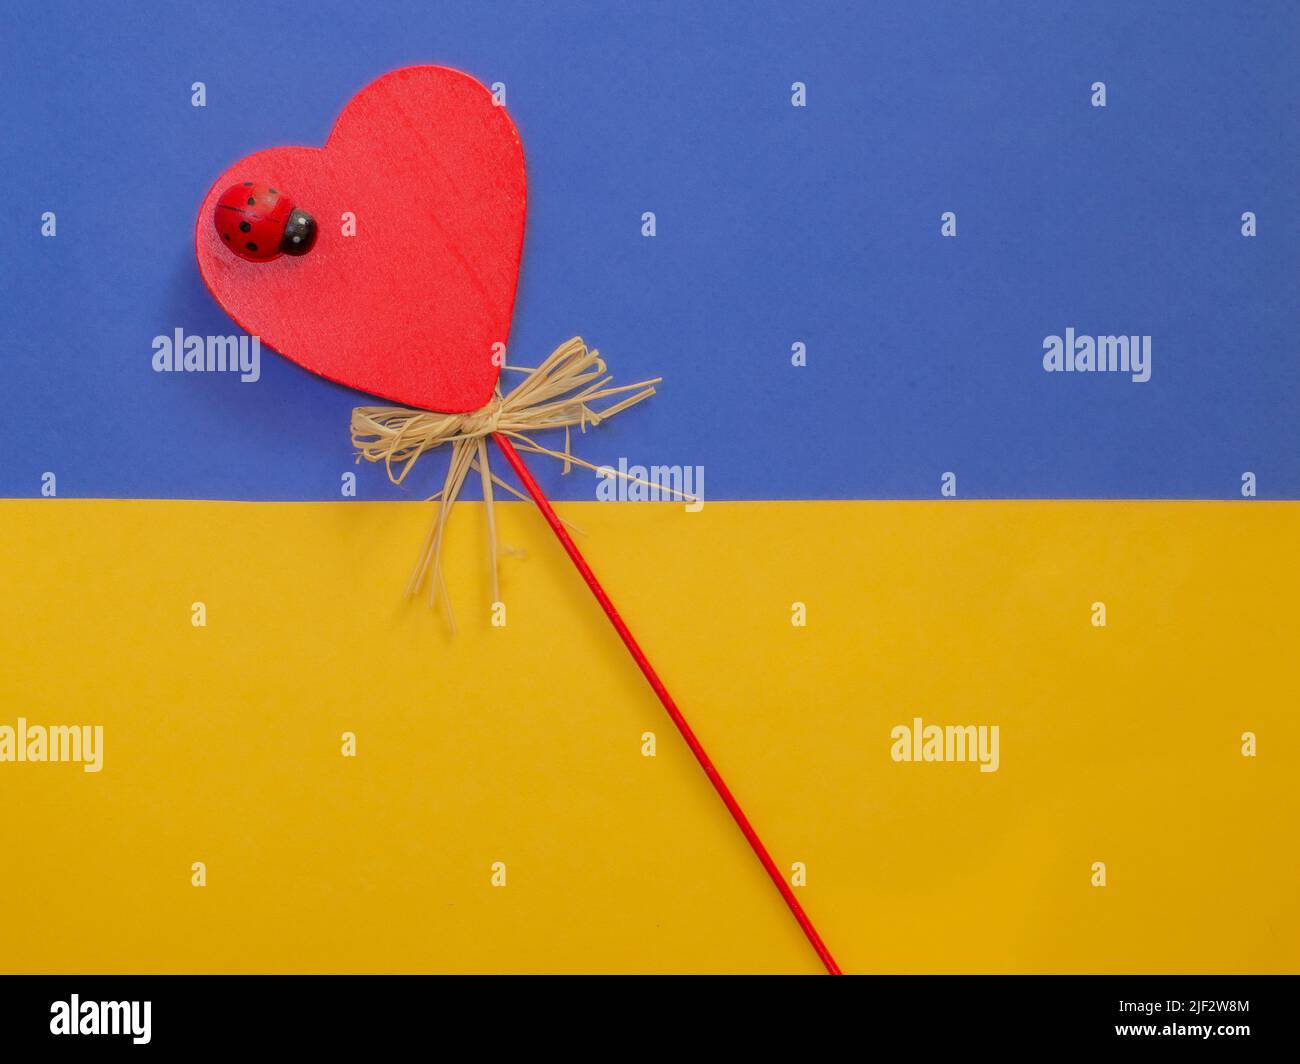 Valentine's Day in the colors of Ukraine. Peace and Love in Ukraine. Ladybug on a heart. Space for text. Stock Photo